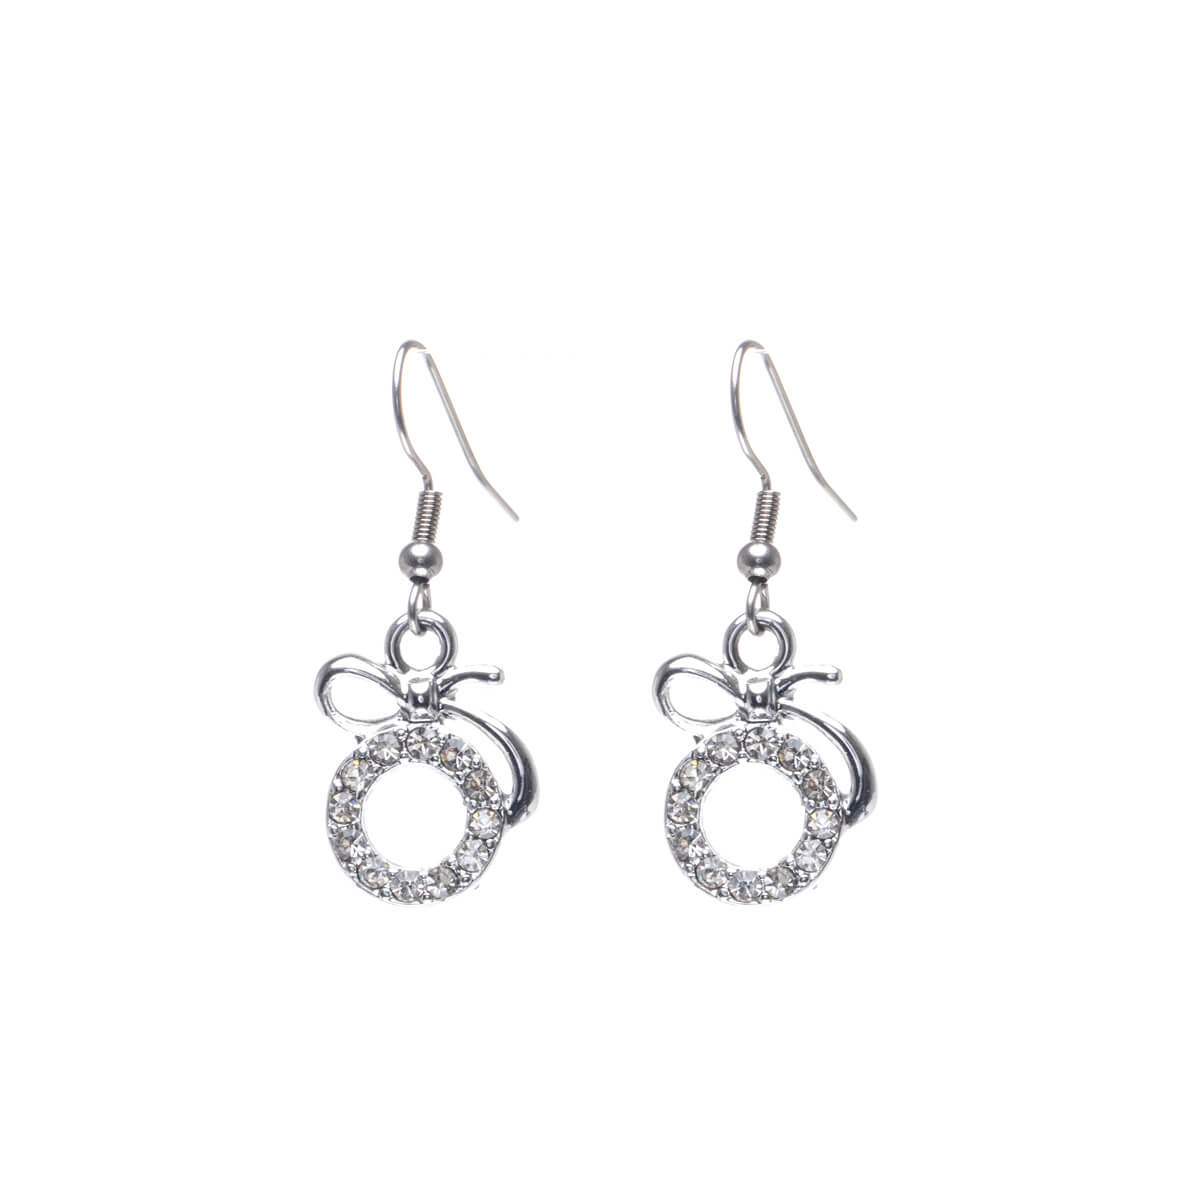 Sparkling round hanging earrings